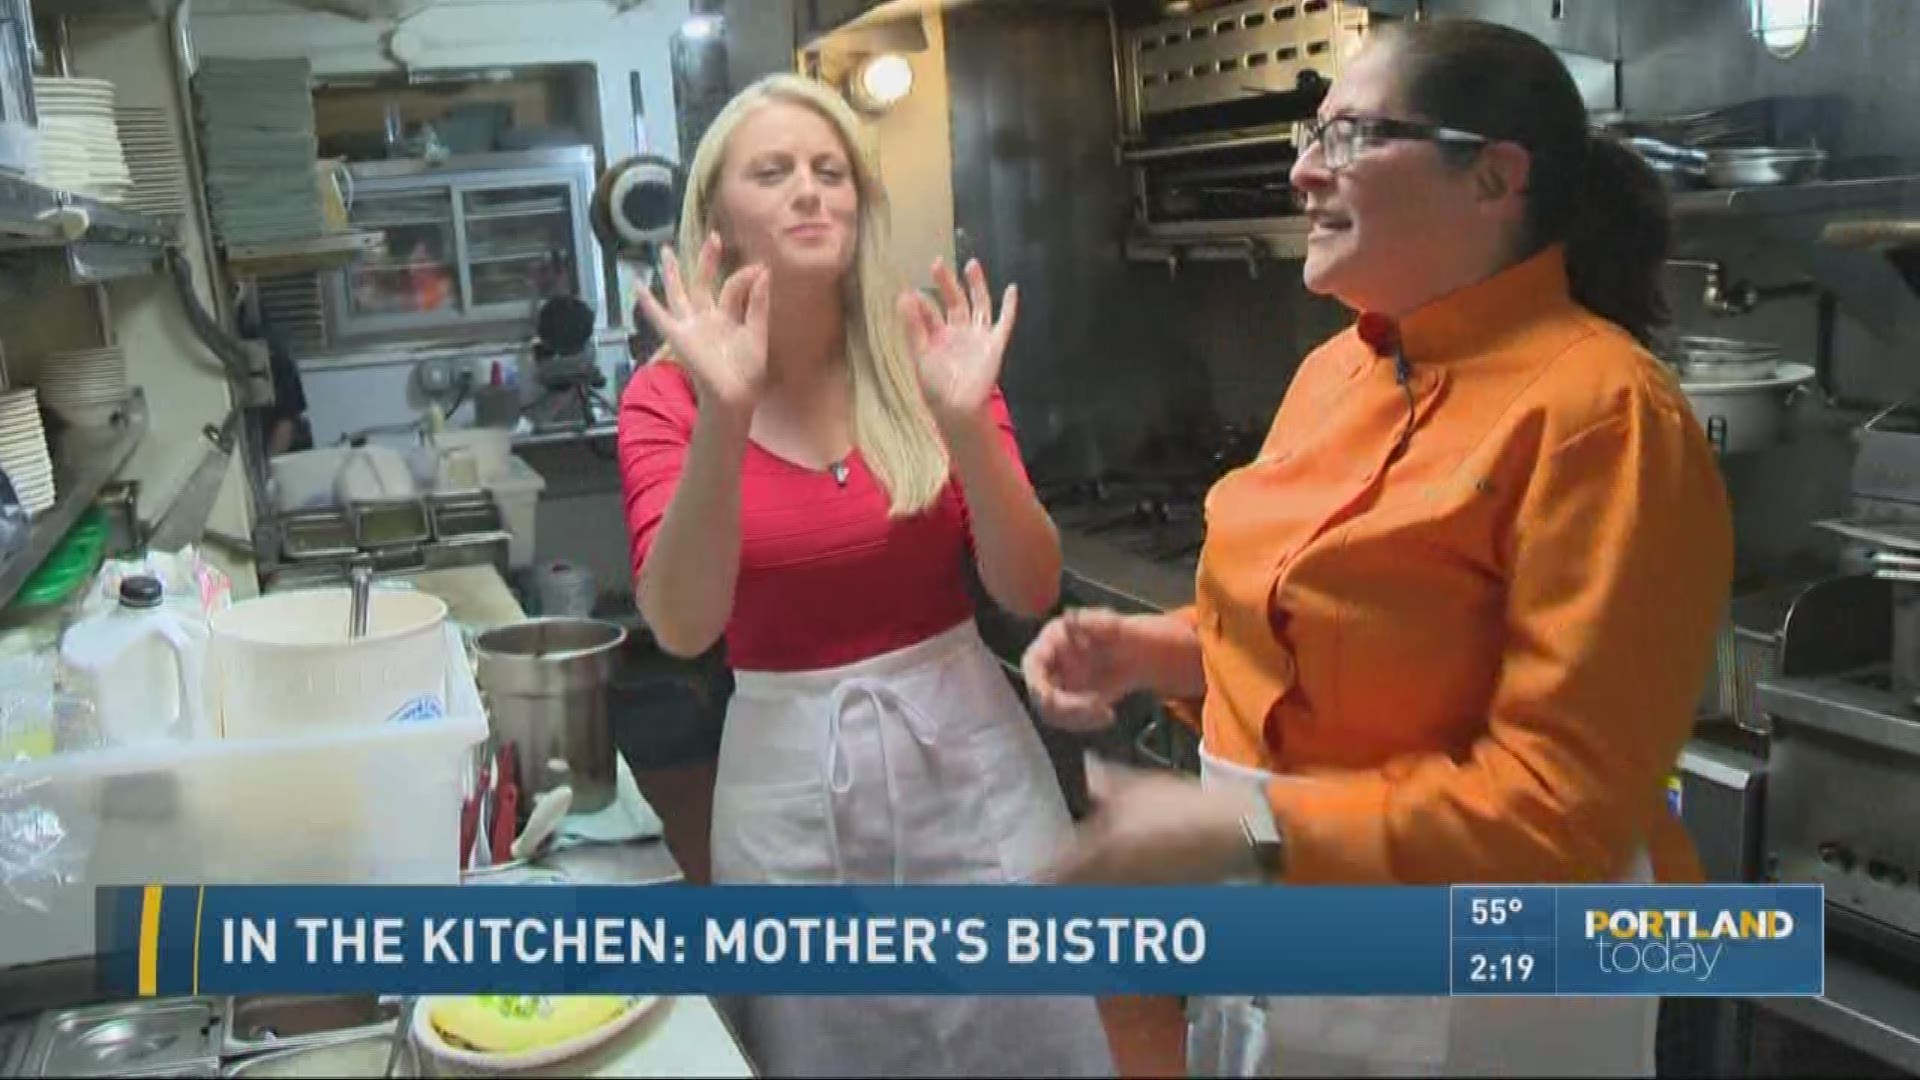 In the kitchen: Mother's Bistro